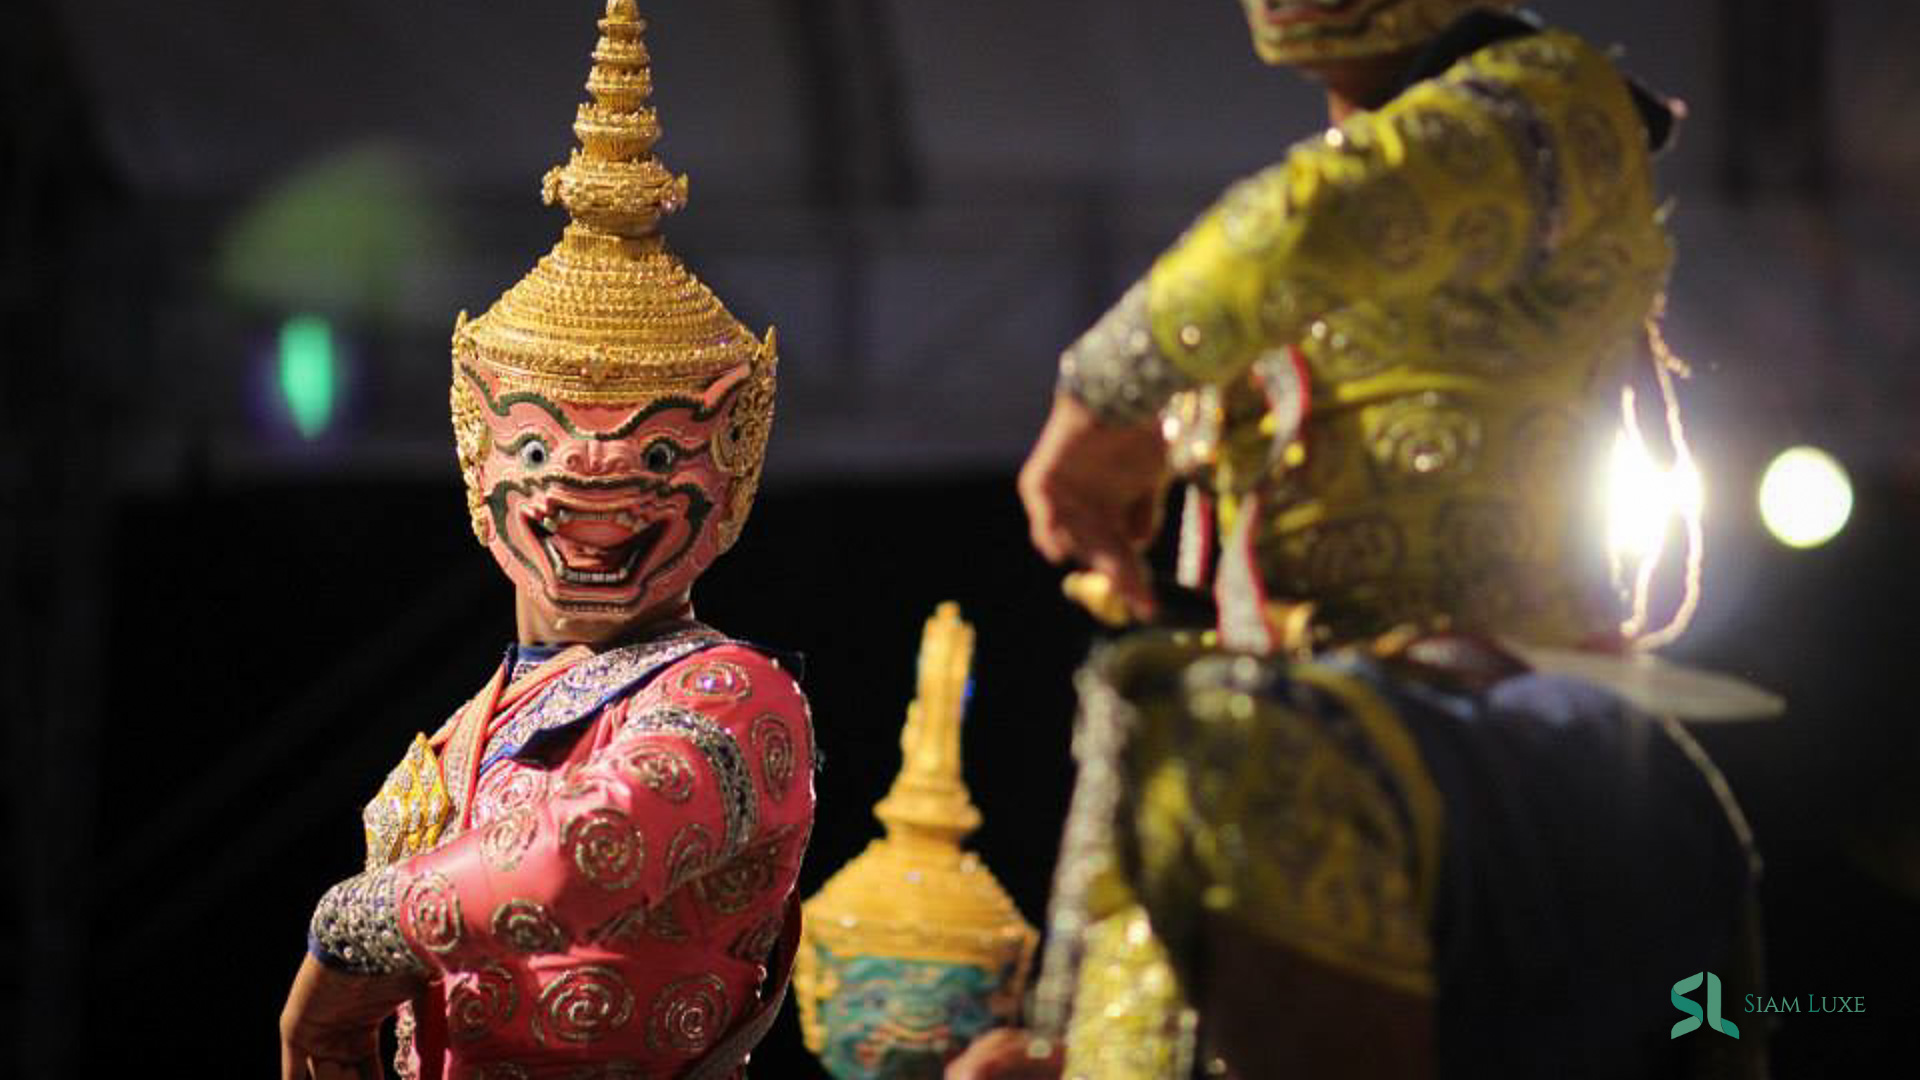 Our tourists attended the Traditional Thai Mask Dance and Drama at the Bangkok National Museum